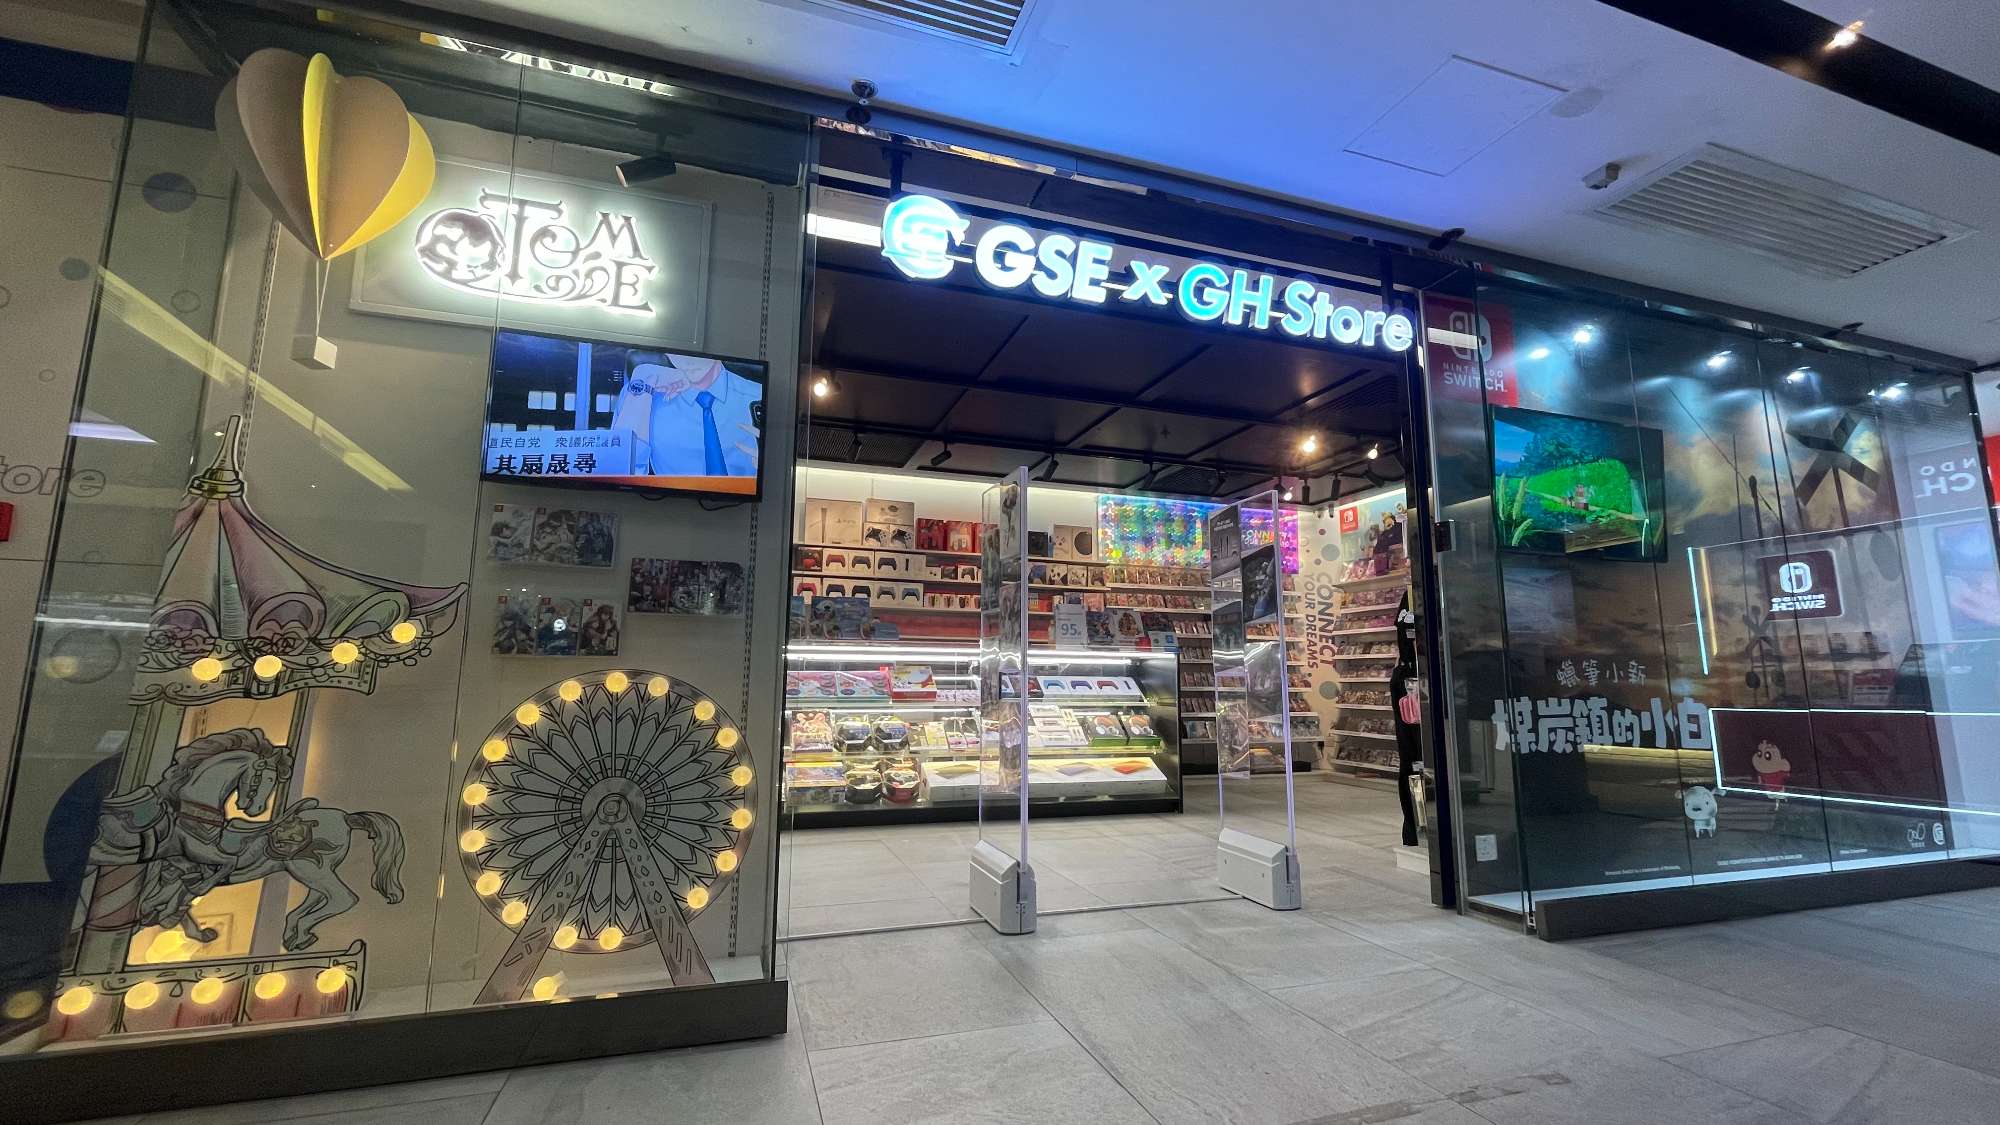 GSE x GH Store.jpeg